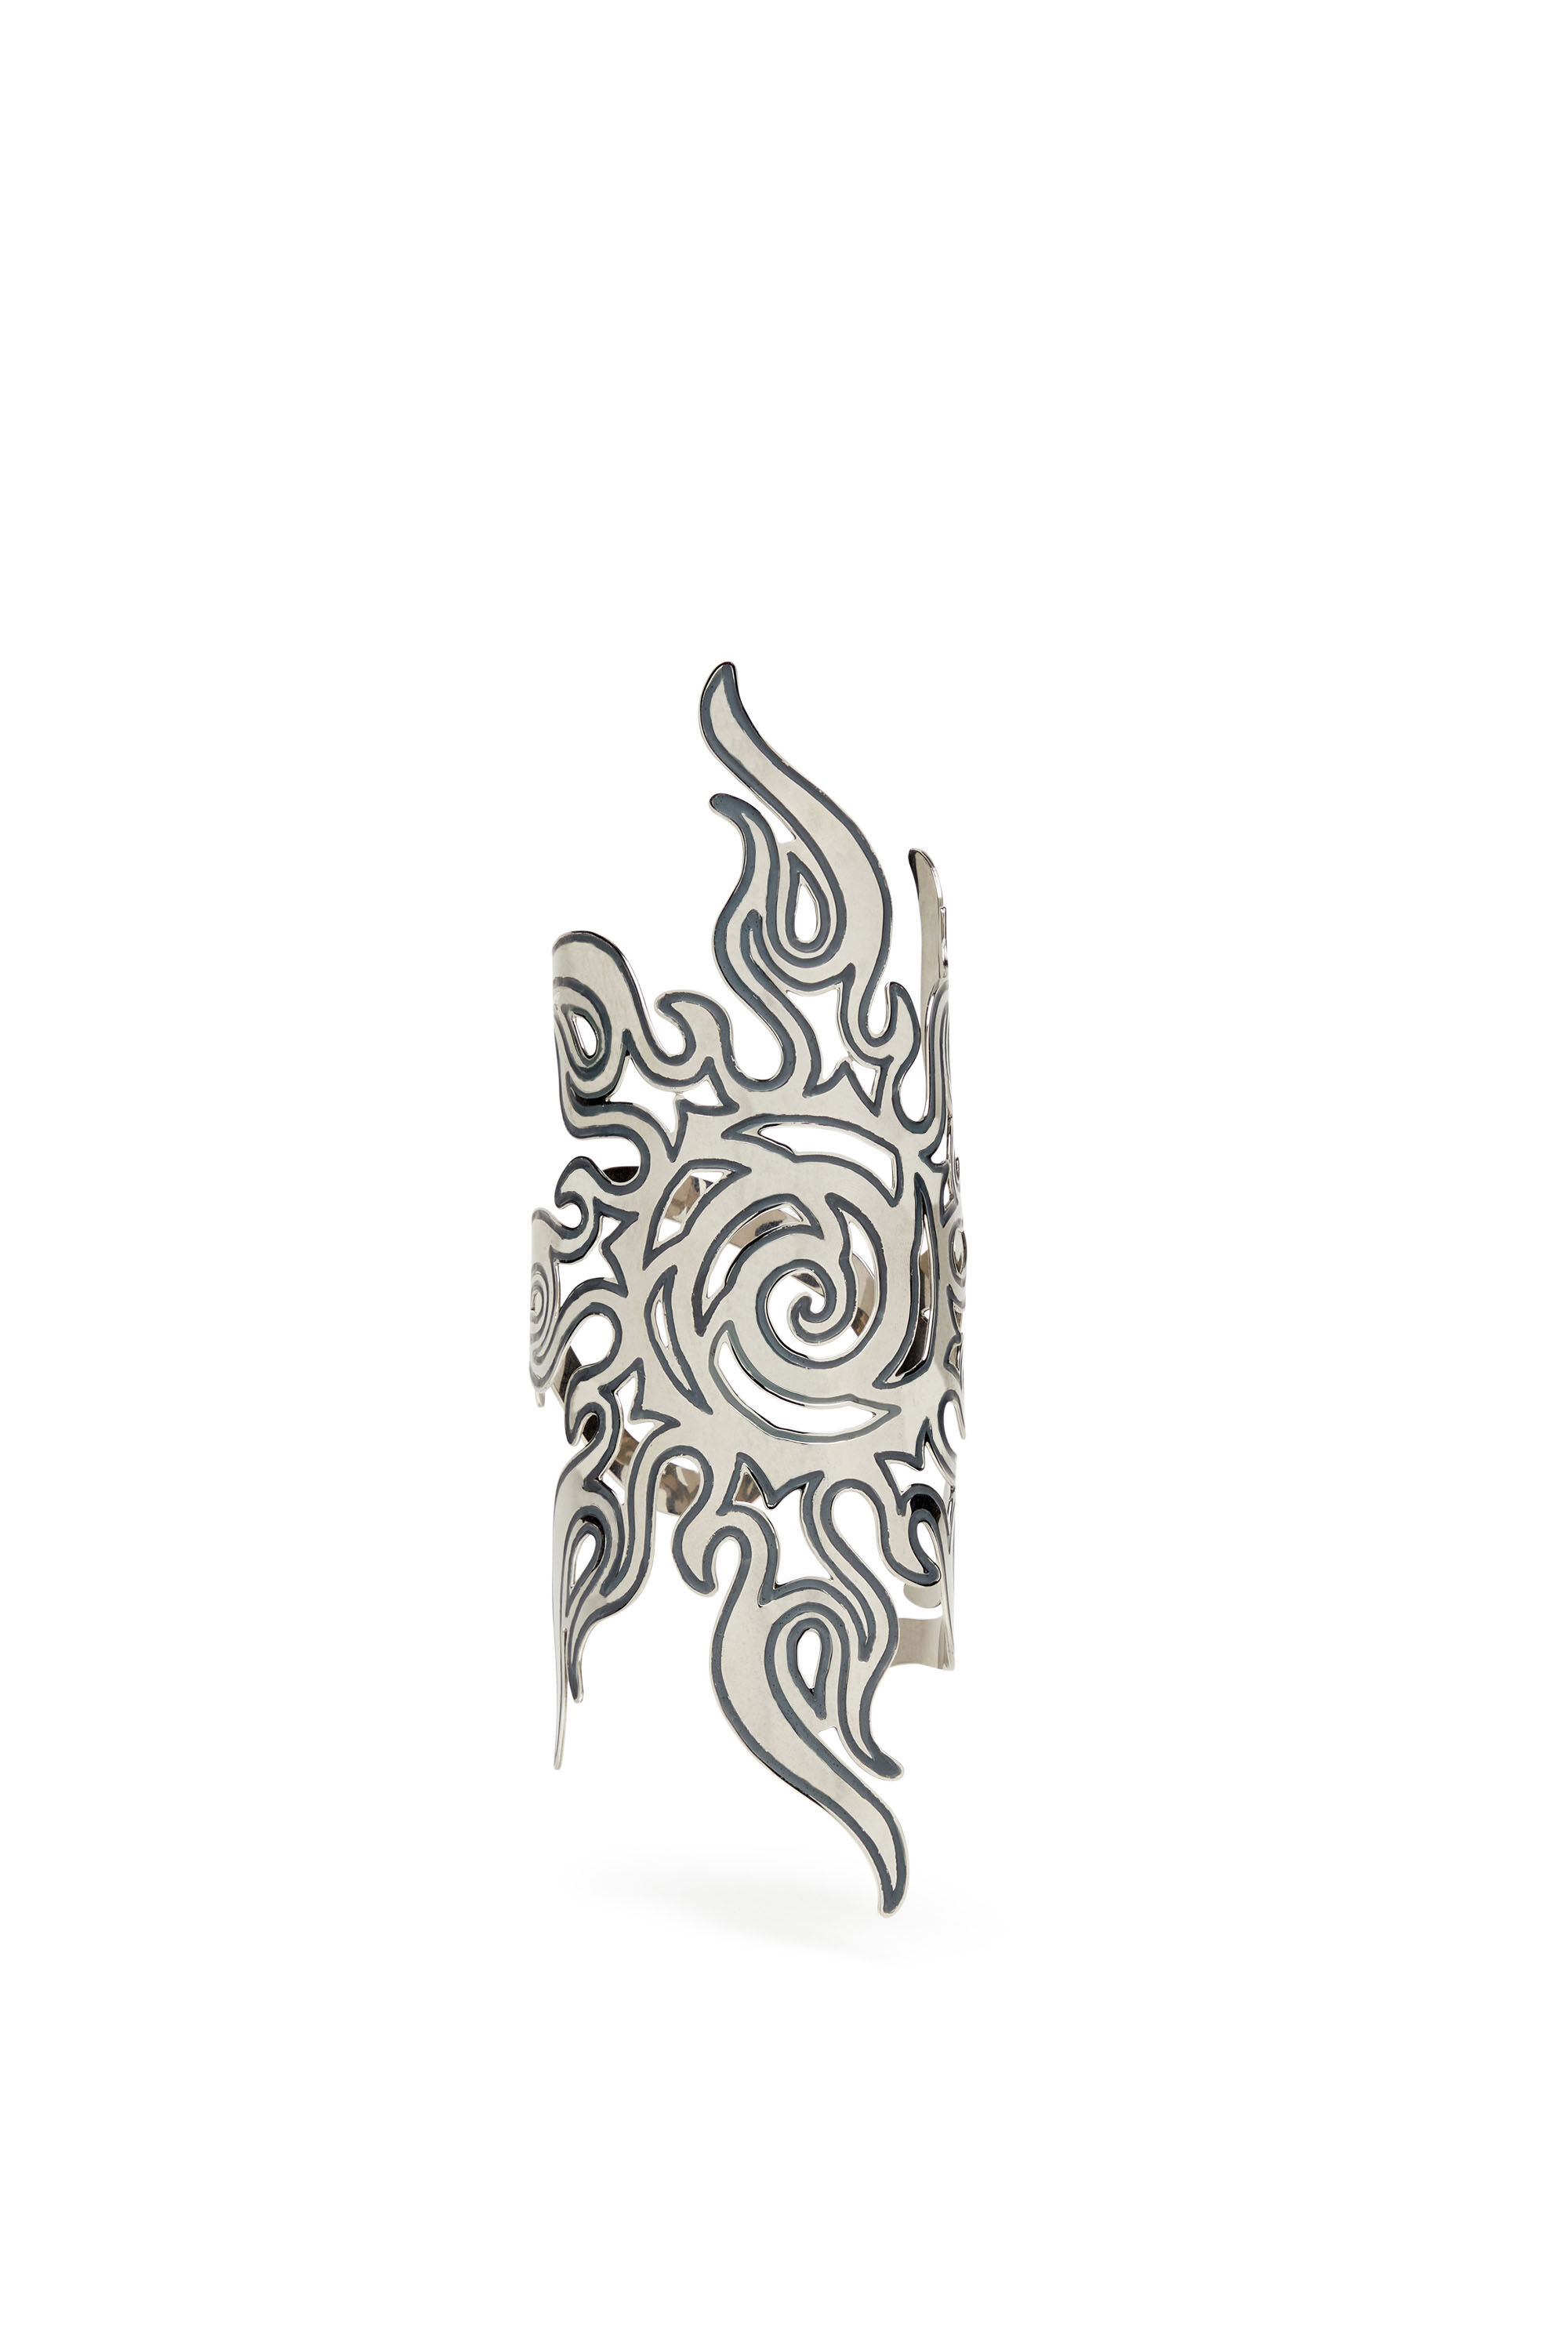 Diesel - TRIBAL SUN ARMBAND, Donna Arm cuff motivo sole tribale in Argento - Image 1